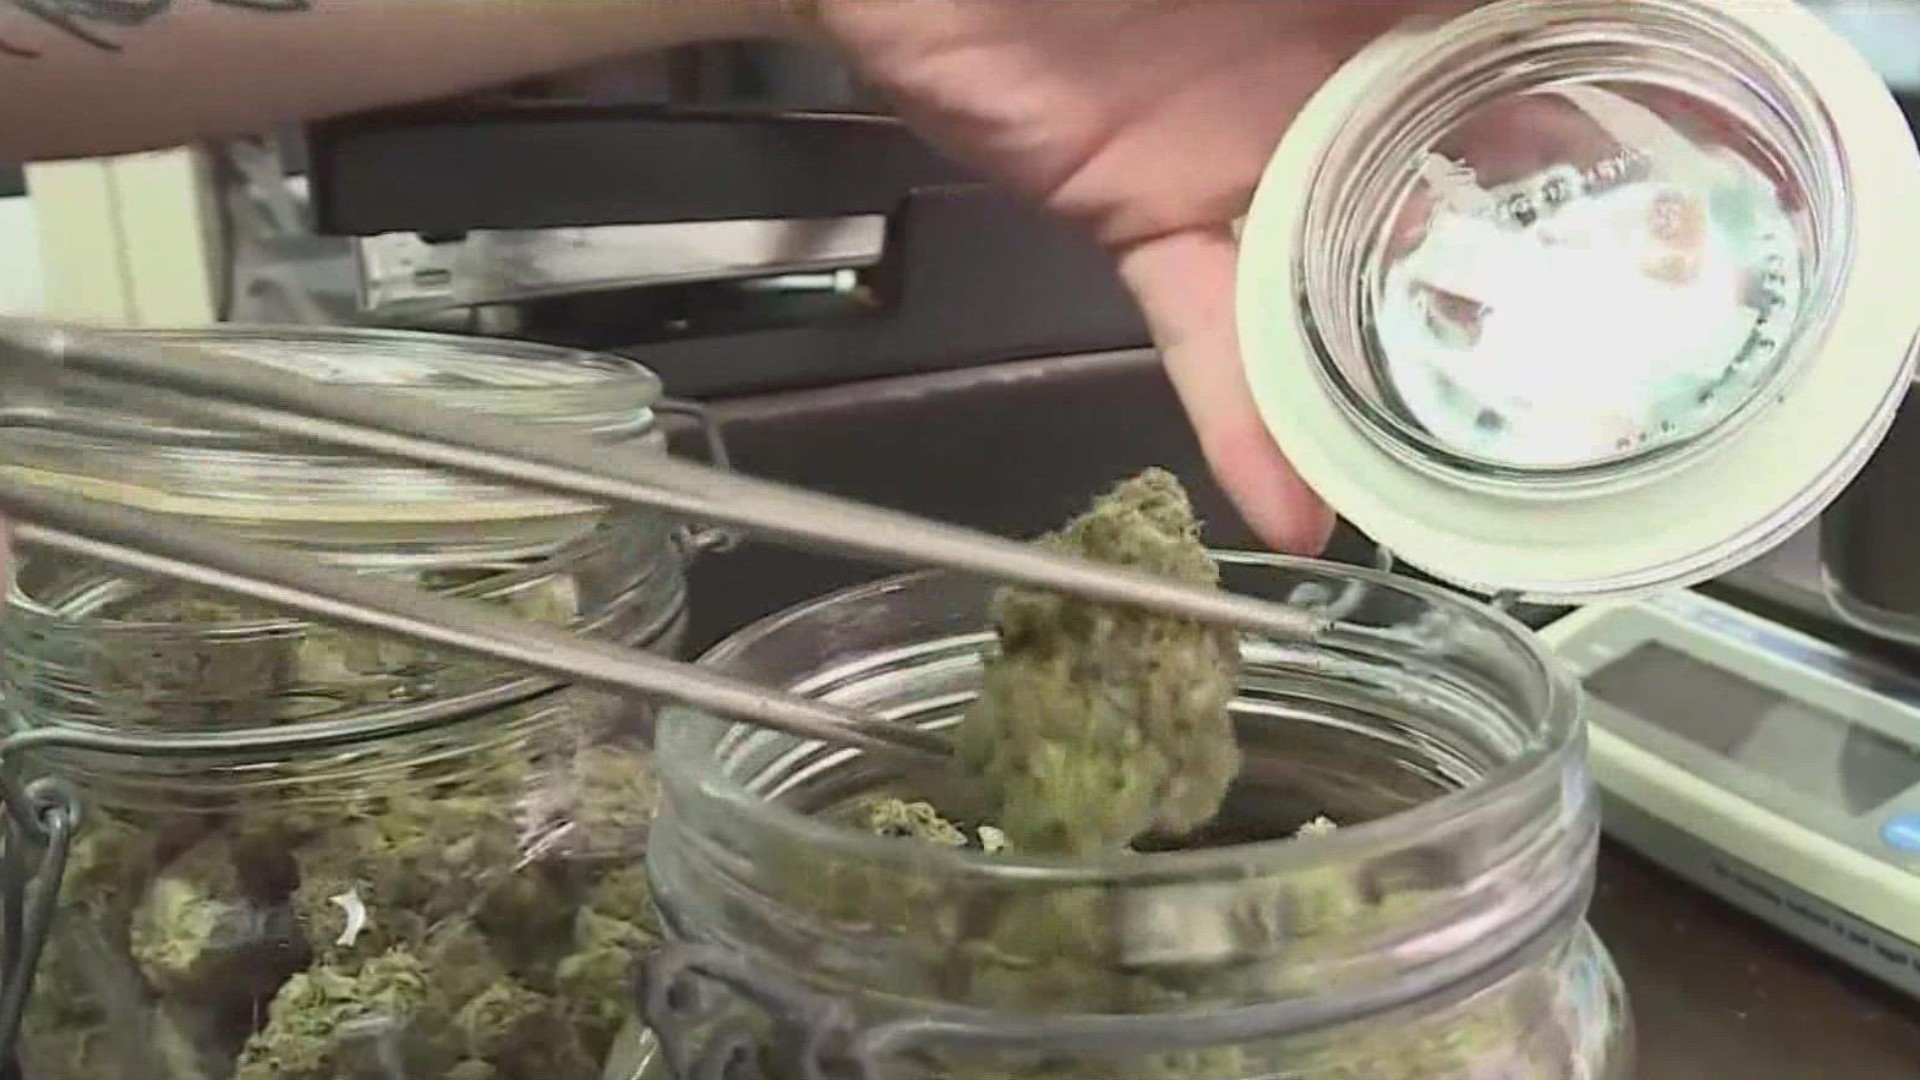 A Northwest Arkansas medical marijuana dispensary is now the largest in the state.